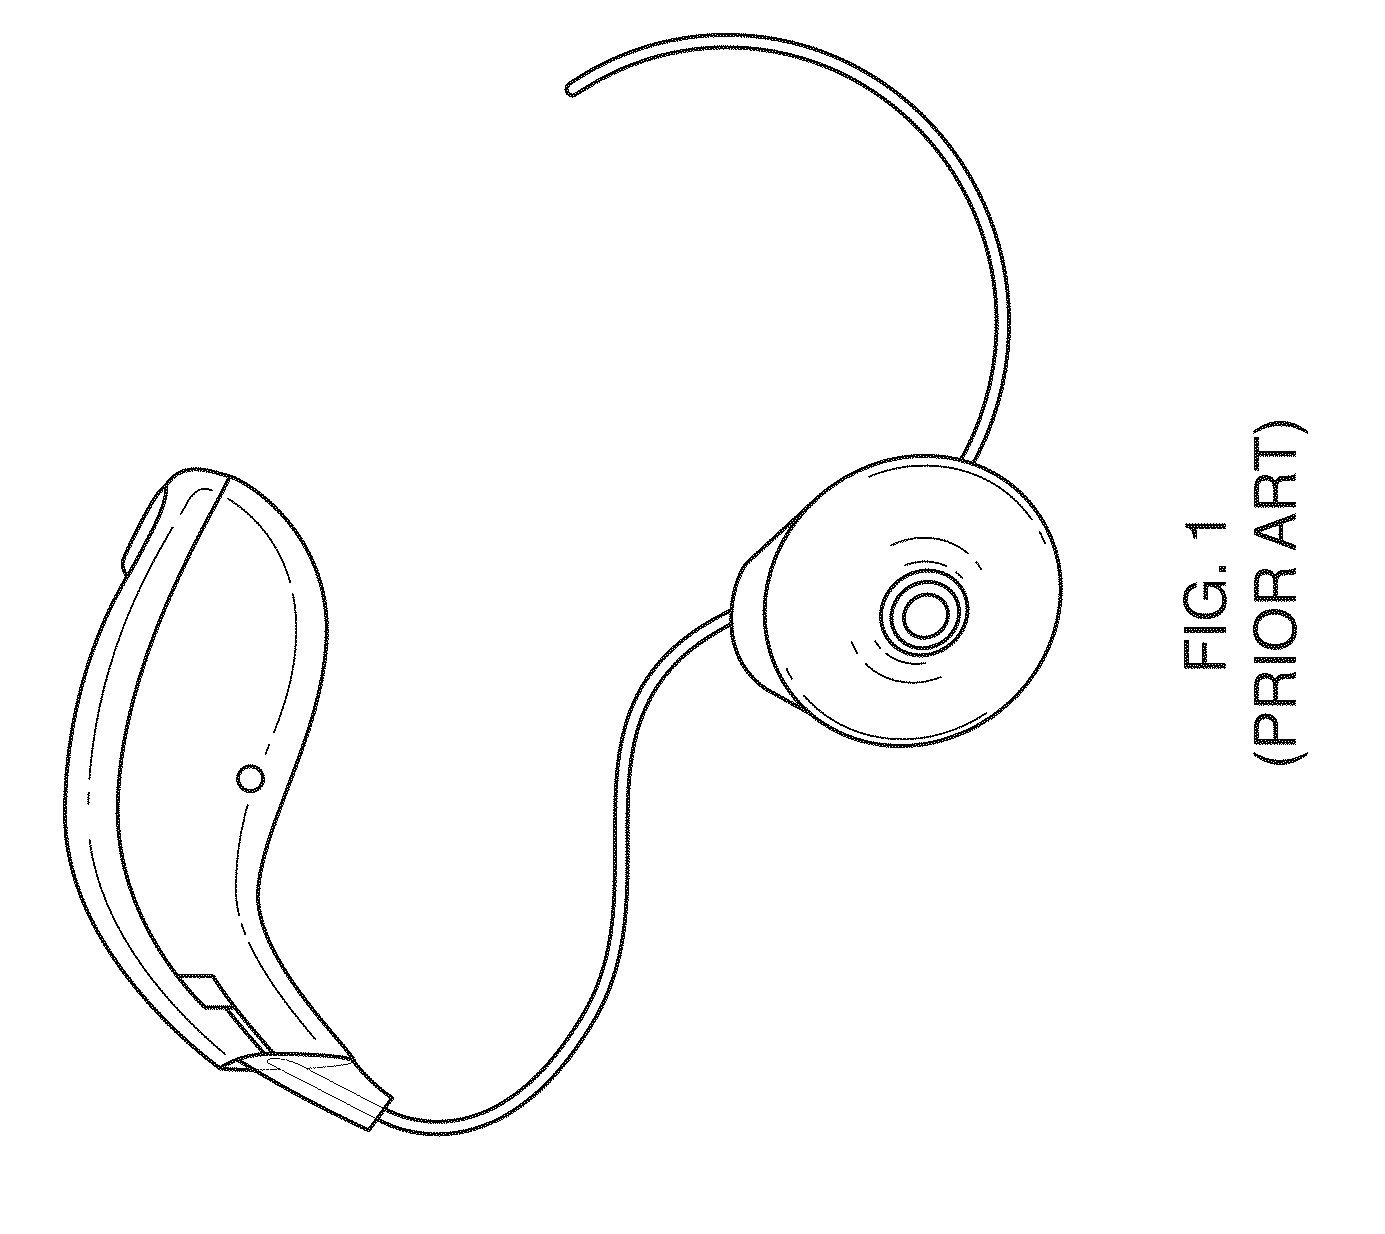 Hearing assistance system